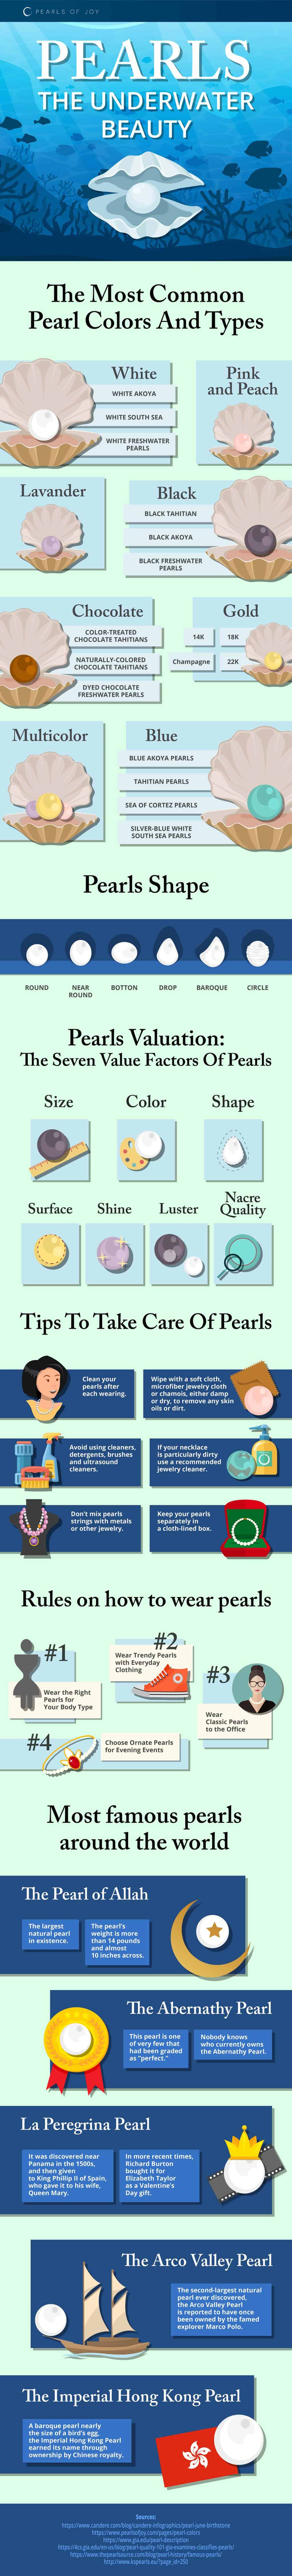 For a timeless look and feminine elegance choose pearls. Follow this guide on how to wear pearl earrings on all occasions and how to care for your pearls.